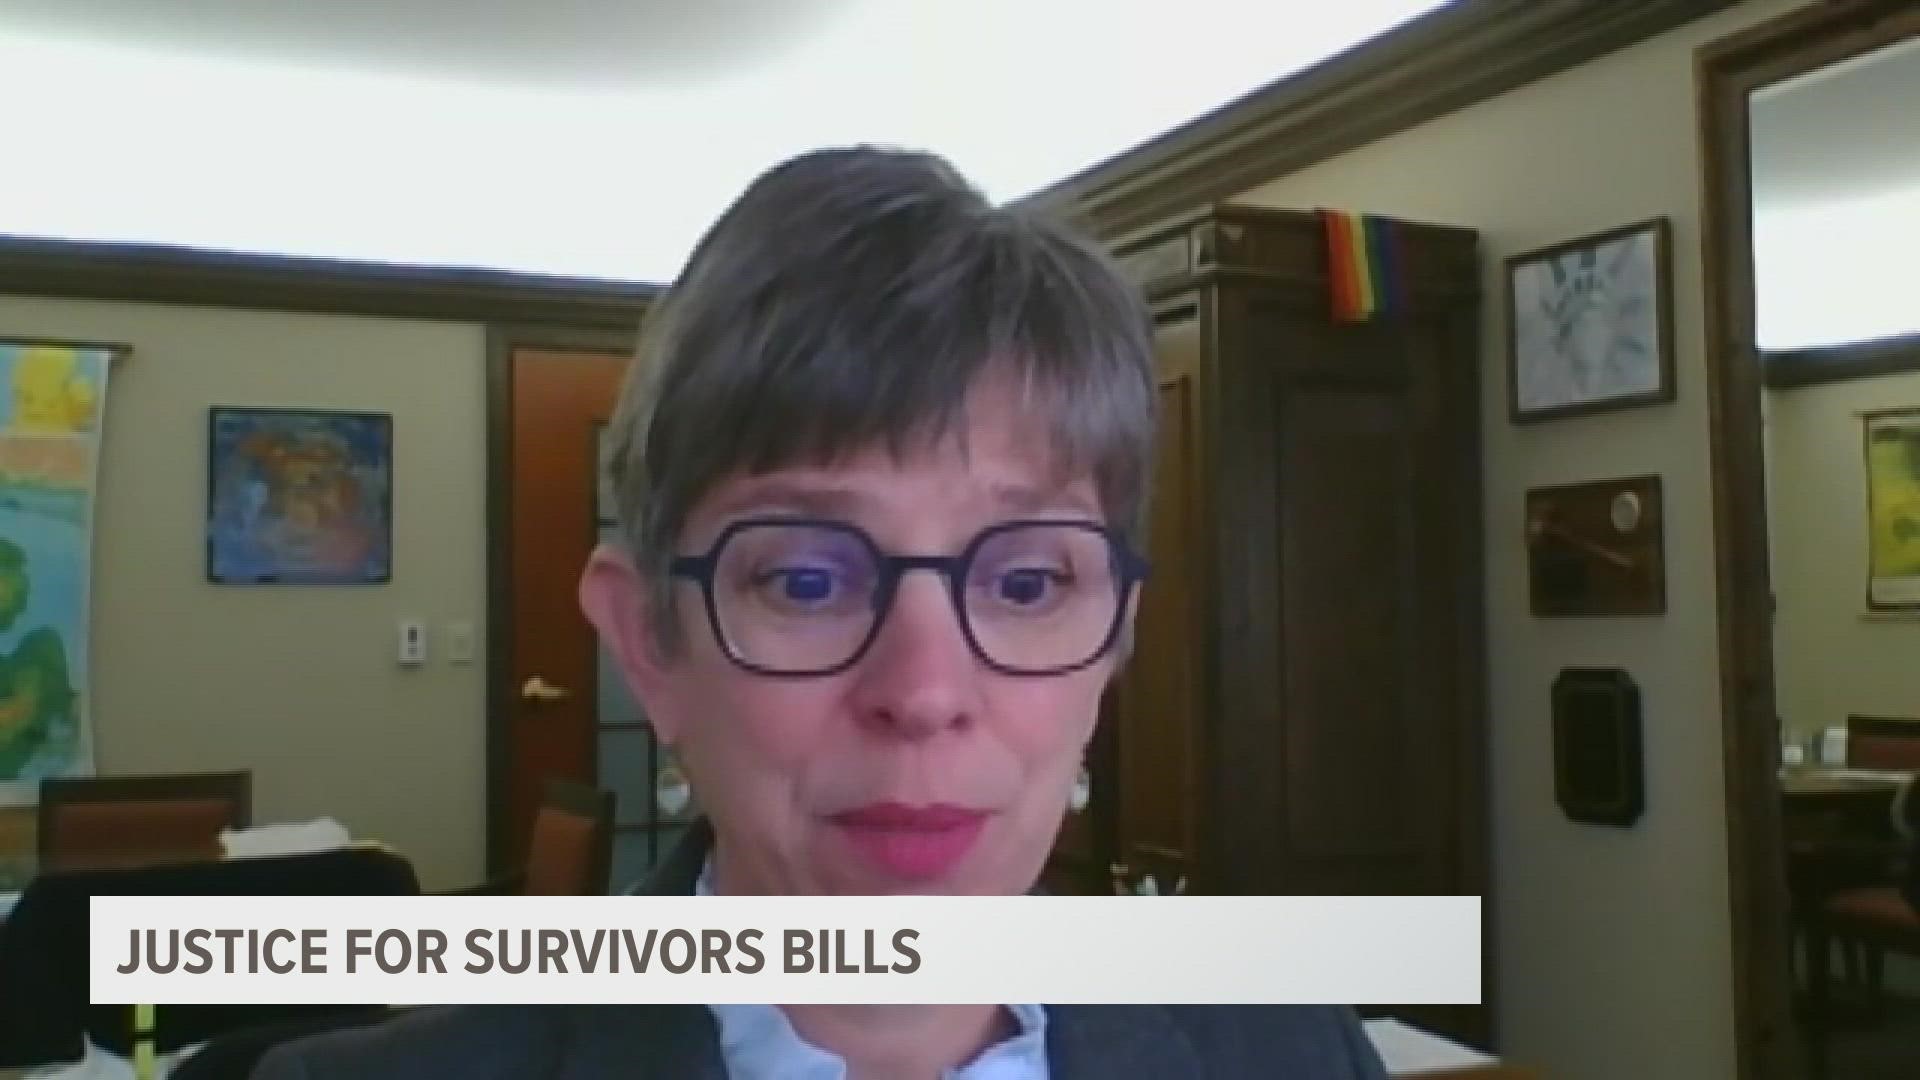 State Rep Julie Brixie of Meridian Township, along, with two others, introduced new Sexual Assault Bills to protect survivors.